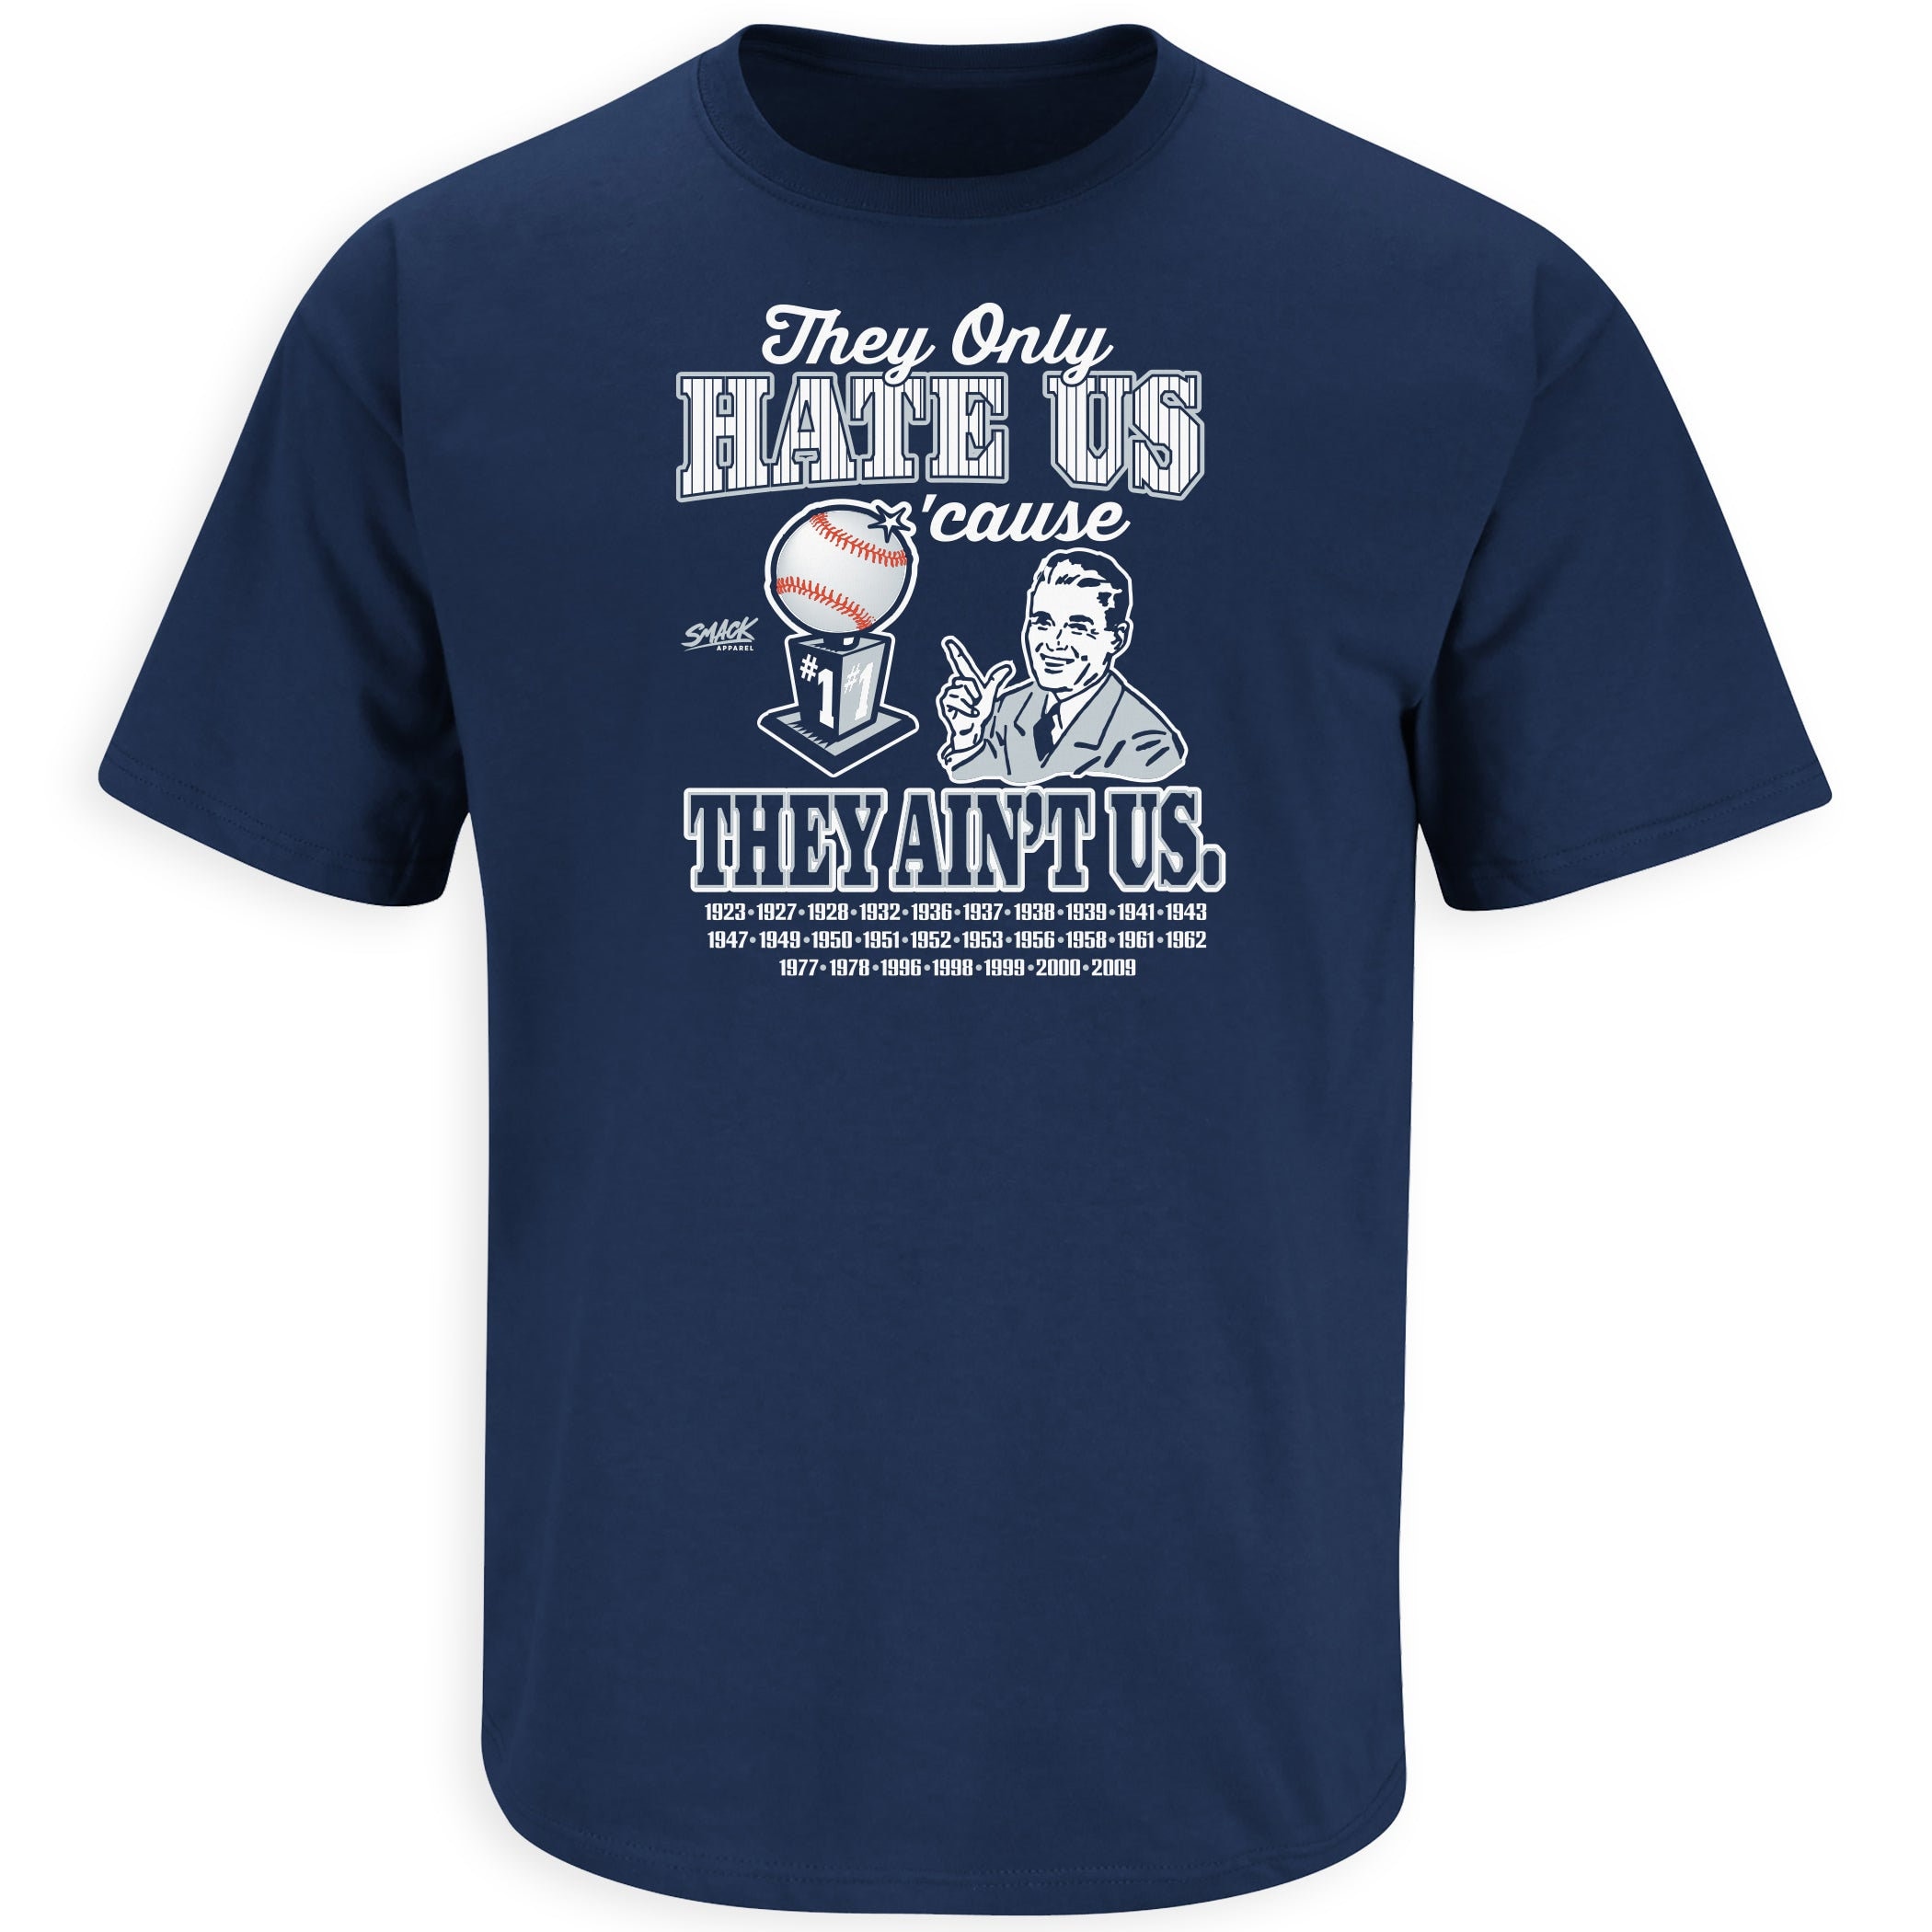 They Hate Us Cuz They Ain't Us Shirt | New York Baseball Fans